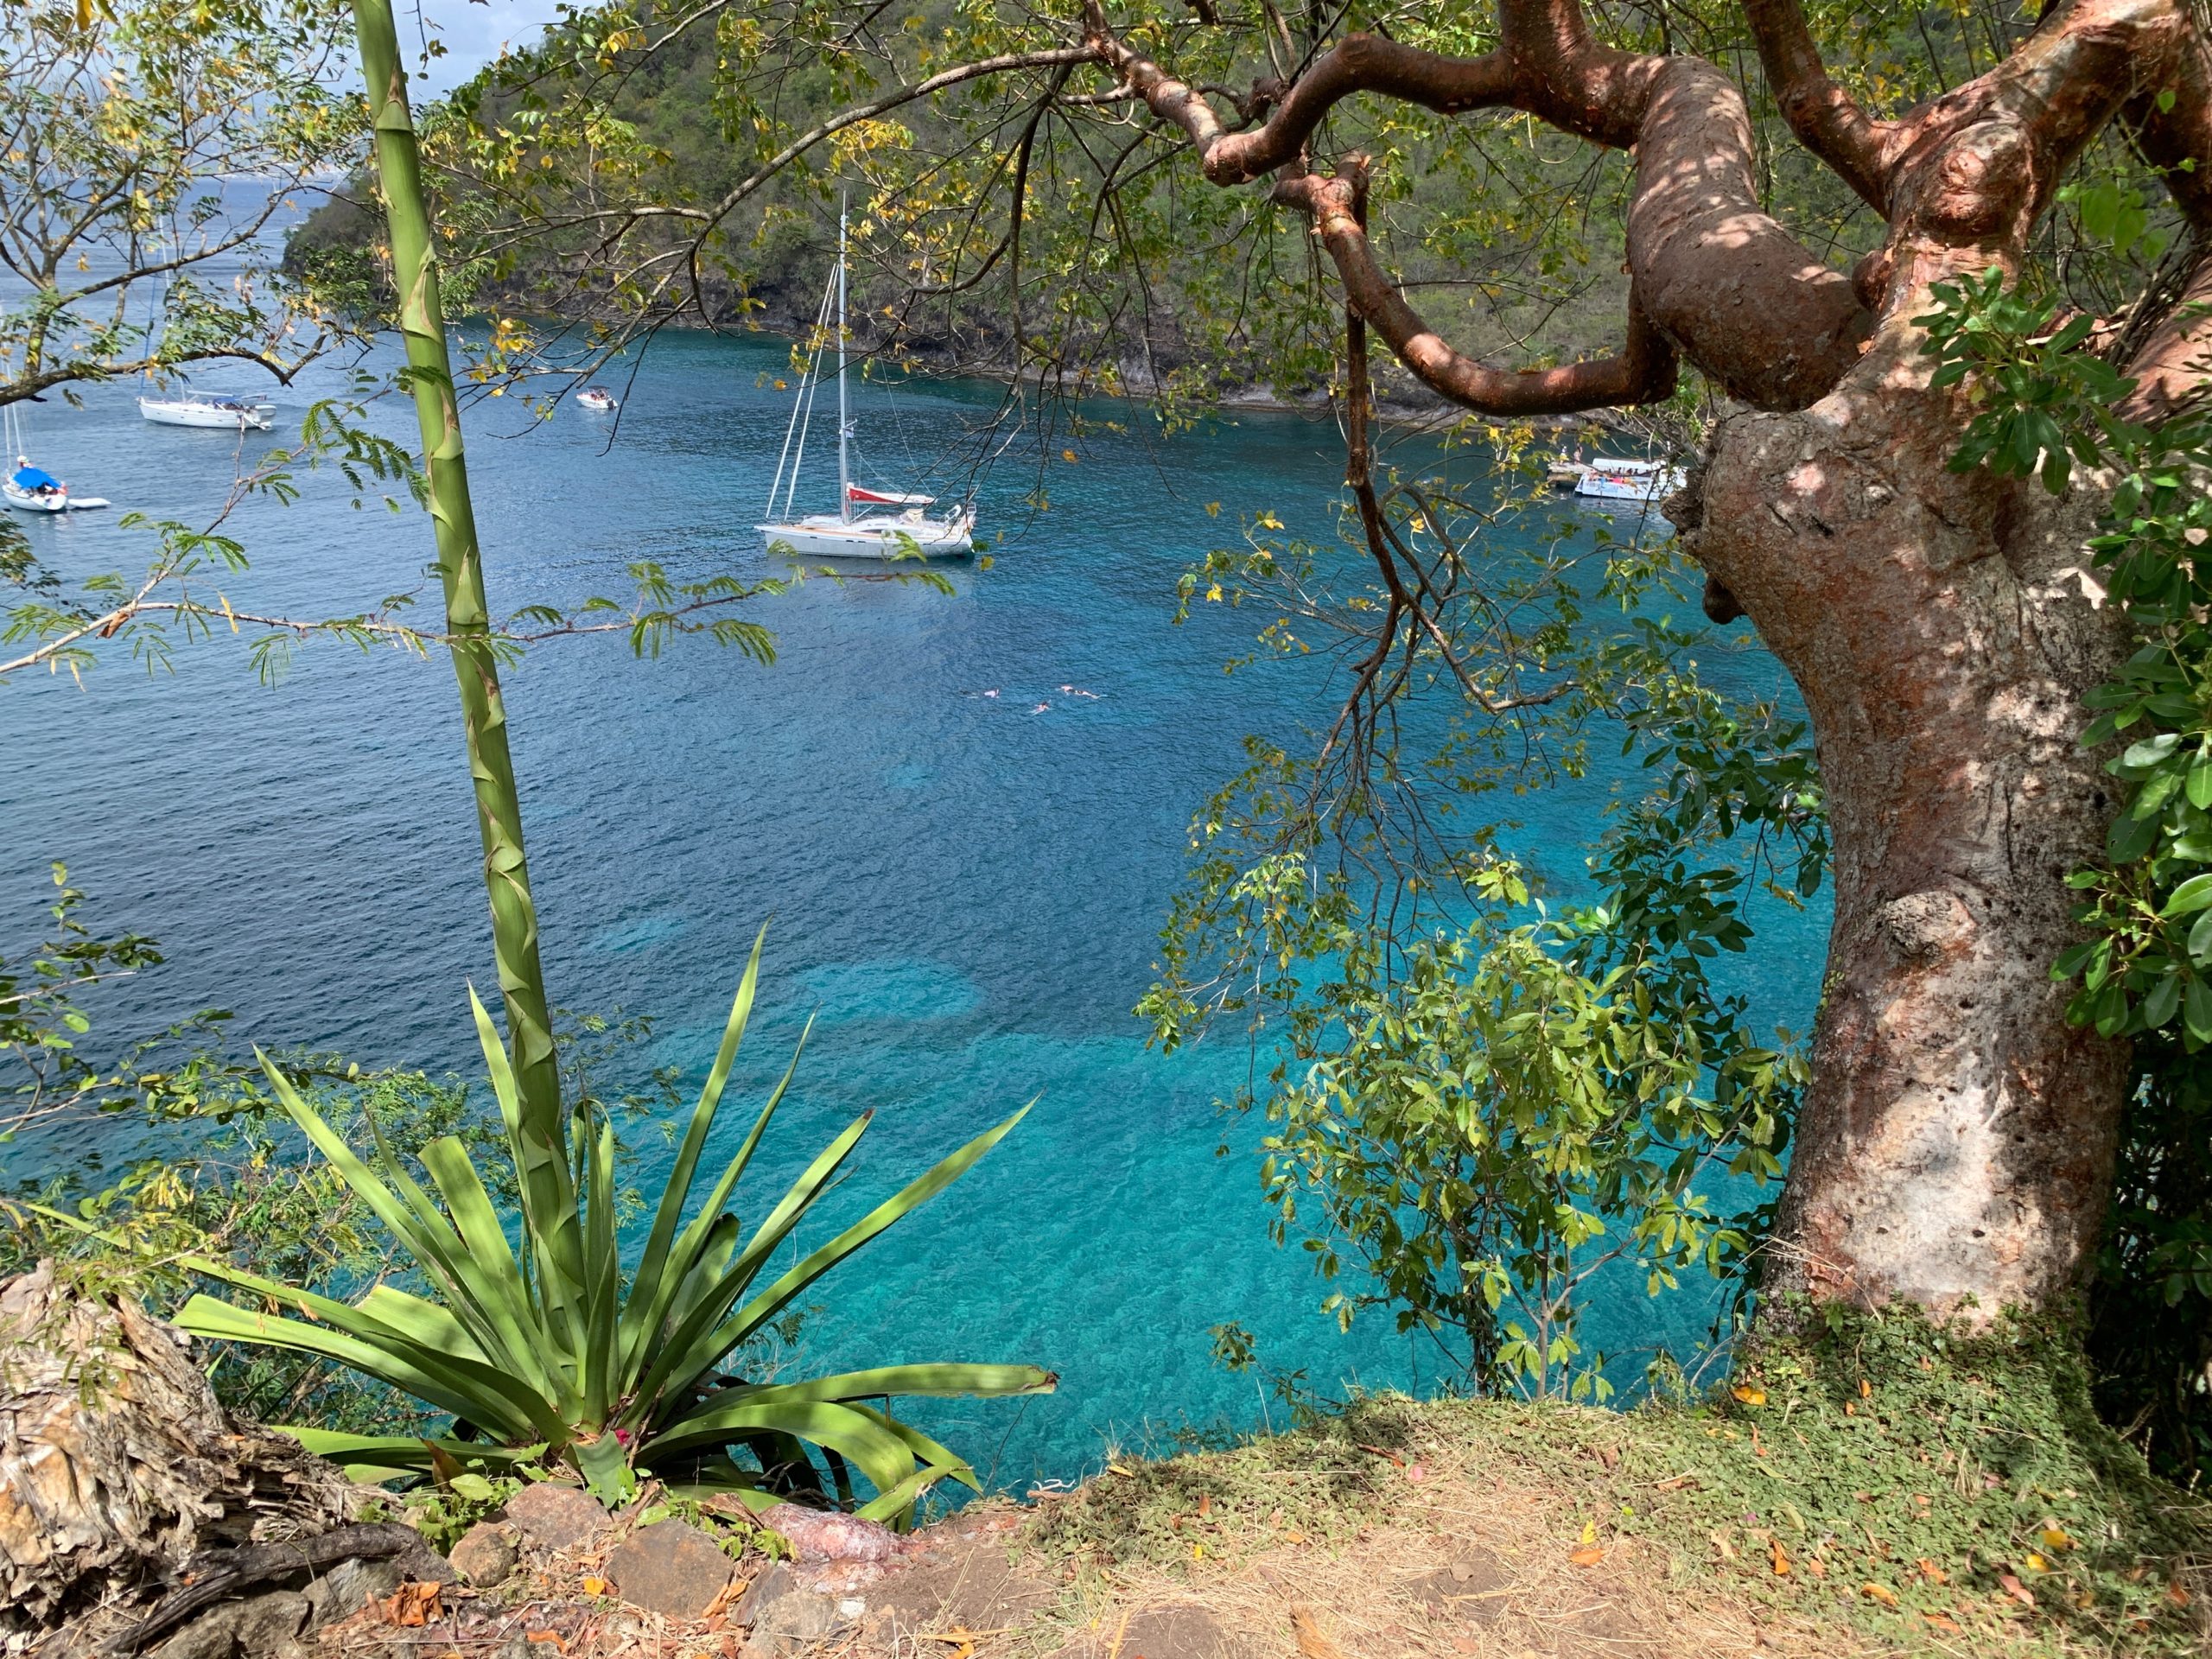 Boats floating on gorgeous blue water at Anse Noire in Les Anses d'Arlet